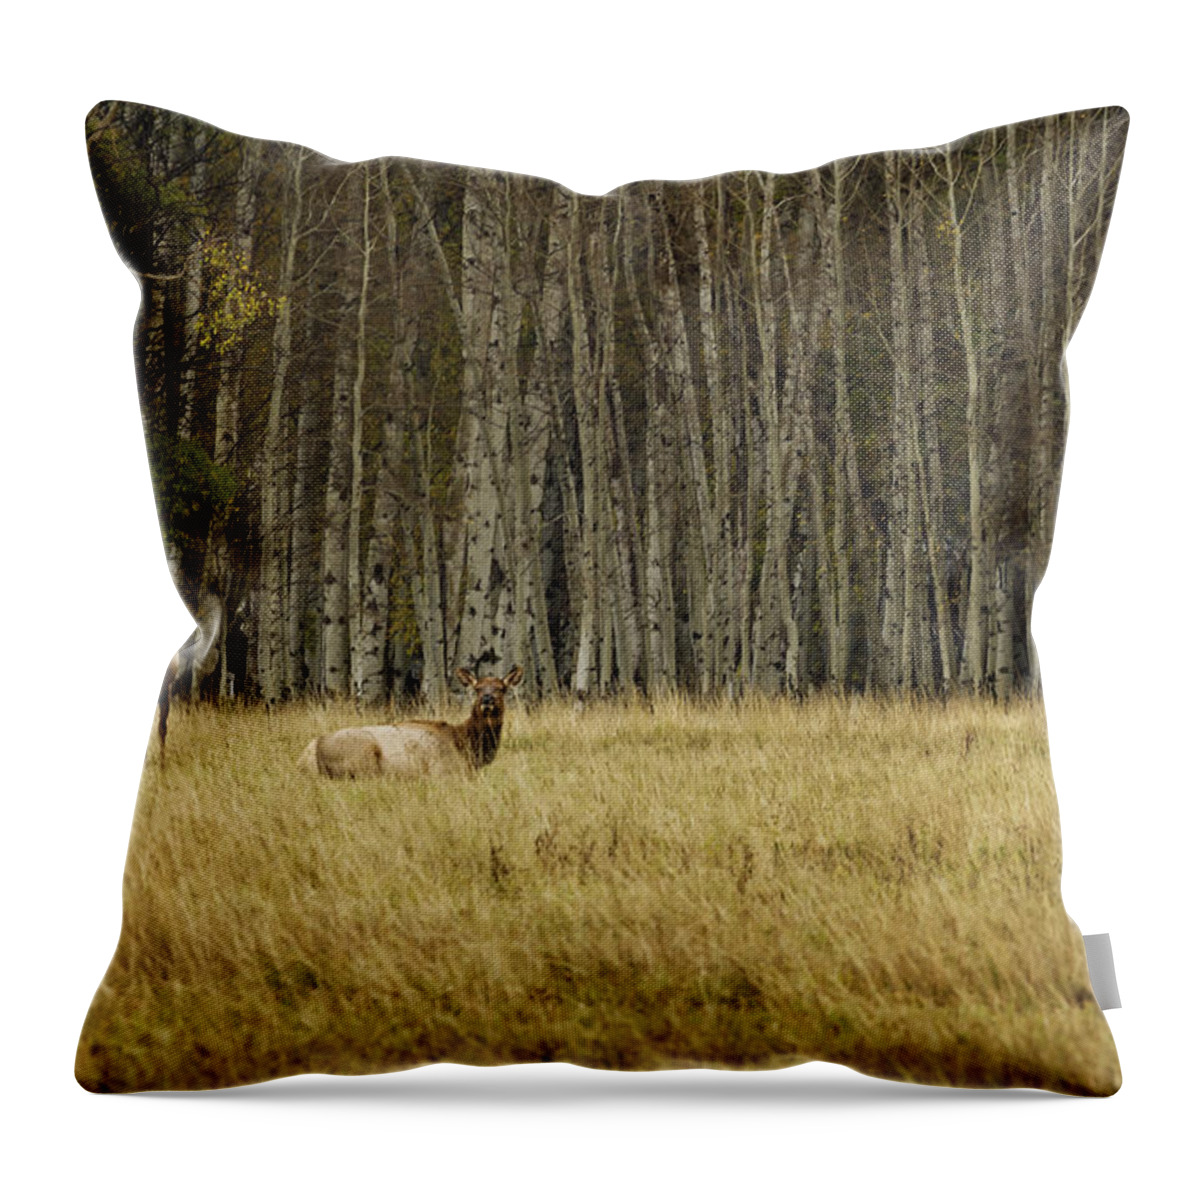 Elk Throw Pillow featuring the photograph Cow Elk Resting - Grand Tetons by Belinda Greb